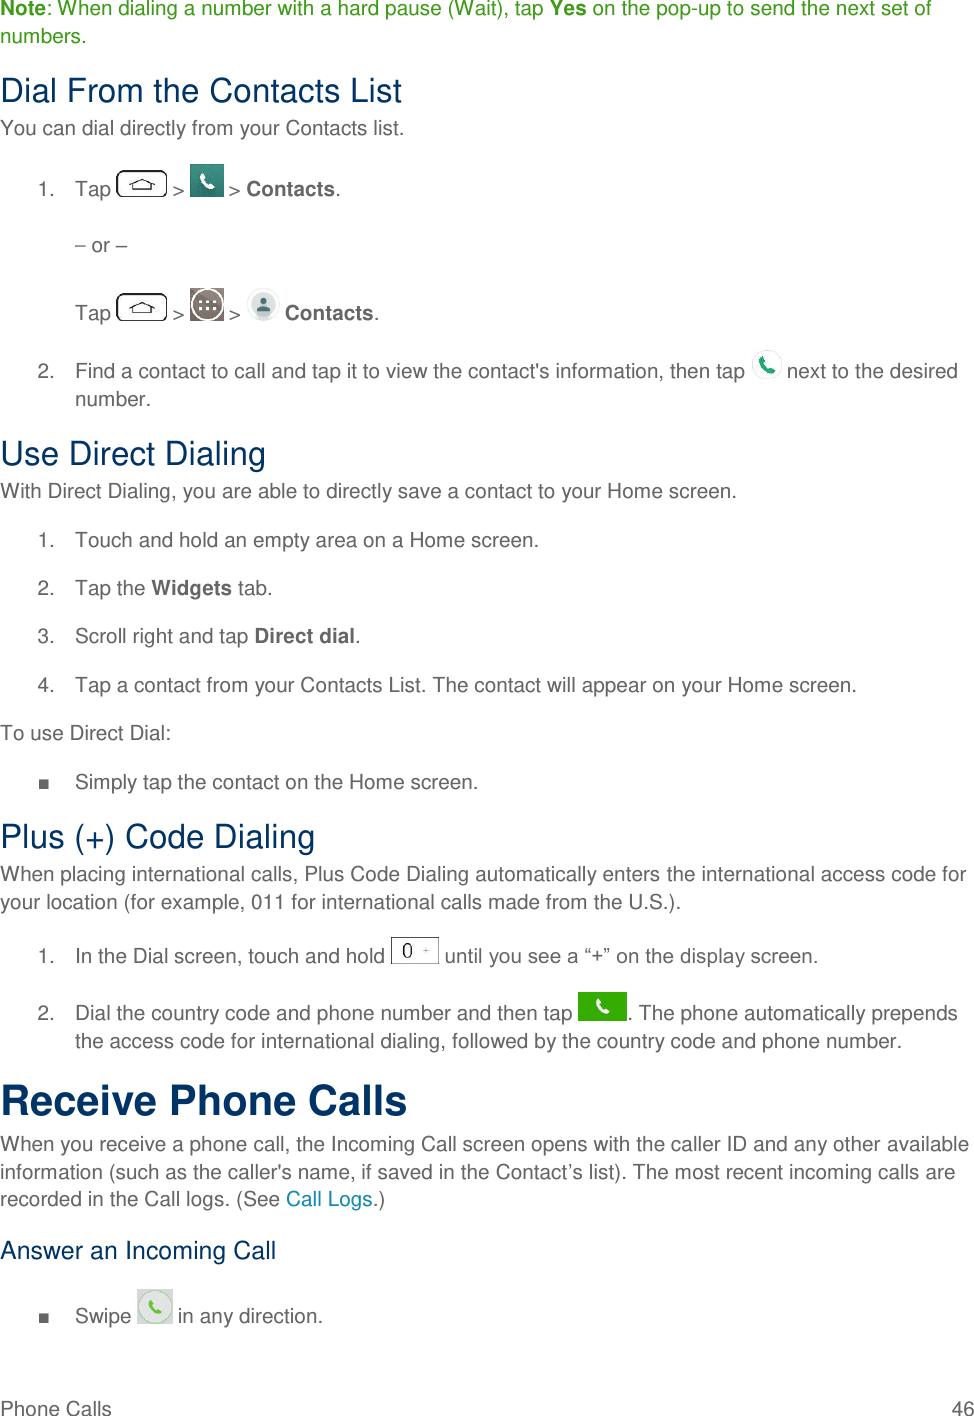 Phone Calls  46 Note: When dialing a number with a hard pause (Wait), tap Yes on the pop-up to send the next set of numbers. Dial From the Contacts List You can dial directly from your Contacts list. 1.  Tap   &gt;   &gt; Contacts. – or – Tap   &gt;   &gt;   Contacts. 2.  Find a contact to call and tap it to view the contact&apos;s information, then tap   next to the desired number. Use Direct Dialing With Direct Dialing, you are able to directly save a contact to your Home screen. 1.  Touch and hold an empty area on a Home screen.  2.  Tap the Widgets tab. 3.  Scroll right and tap Direct dial. 4.  Tap a contact from your Contacts List. The contact will appear on your Home screen. To use Direct Dial: ■  Simply tap the contact on the Home screen. Plus (+) Code Dialing When placing international calls, Plus Code Dialing automatically enters the international access code for your location (for example, 011 for international calls made from the U.S.). 1.  In the Dial screen, touch and hold   until you see a ―+‖ on the display screen. 2.  Dial the country code and phone number and then tap  . The phone automatically prepends the access code for international dialing, followed by the country code and phone number. Receive Phone Calls When you receive a phone call, the Incoming Call screen opens with the caller ID and any other available information (such as the caller&apos;s name, if saved in the Contact‘s list). The most recent incoming calls are recorded in the Call logs. (See Call Logs.) Answer an Incoming Call ■  Swipe   in any direction. 